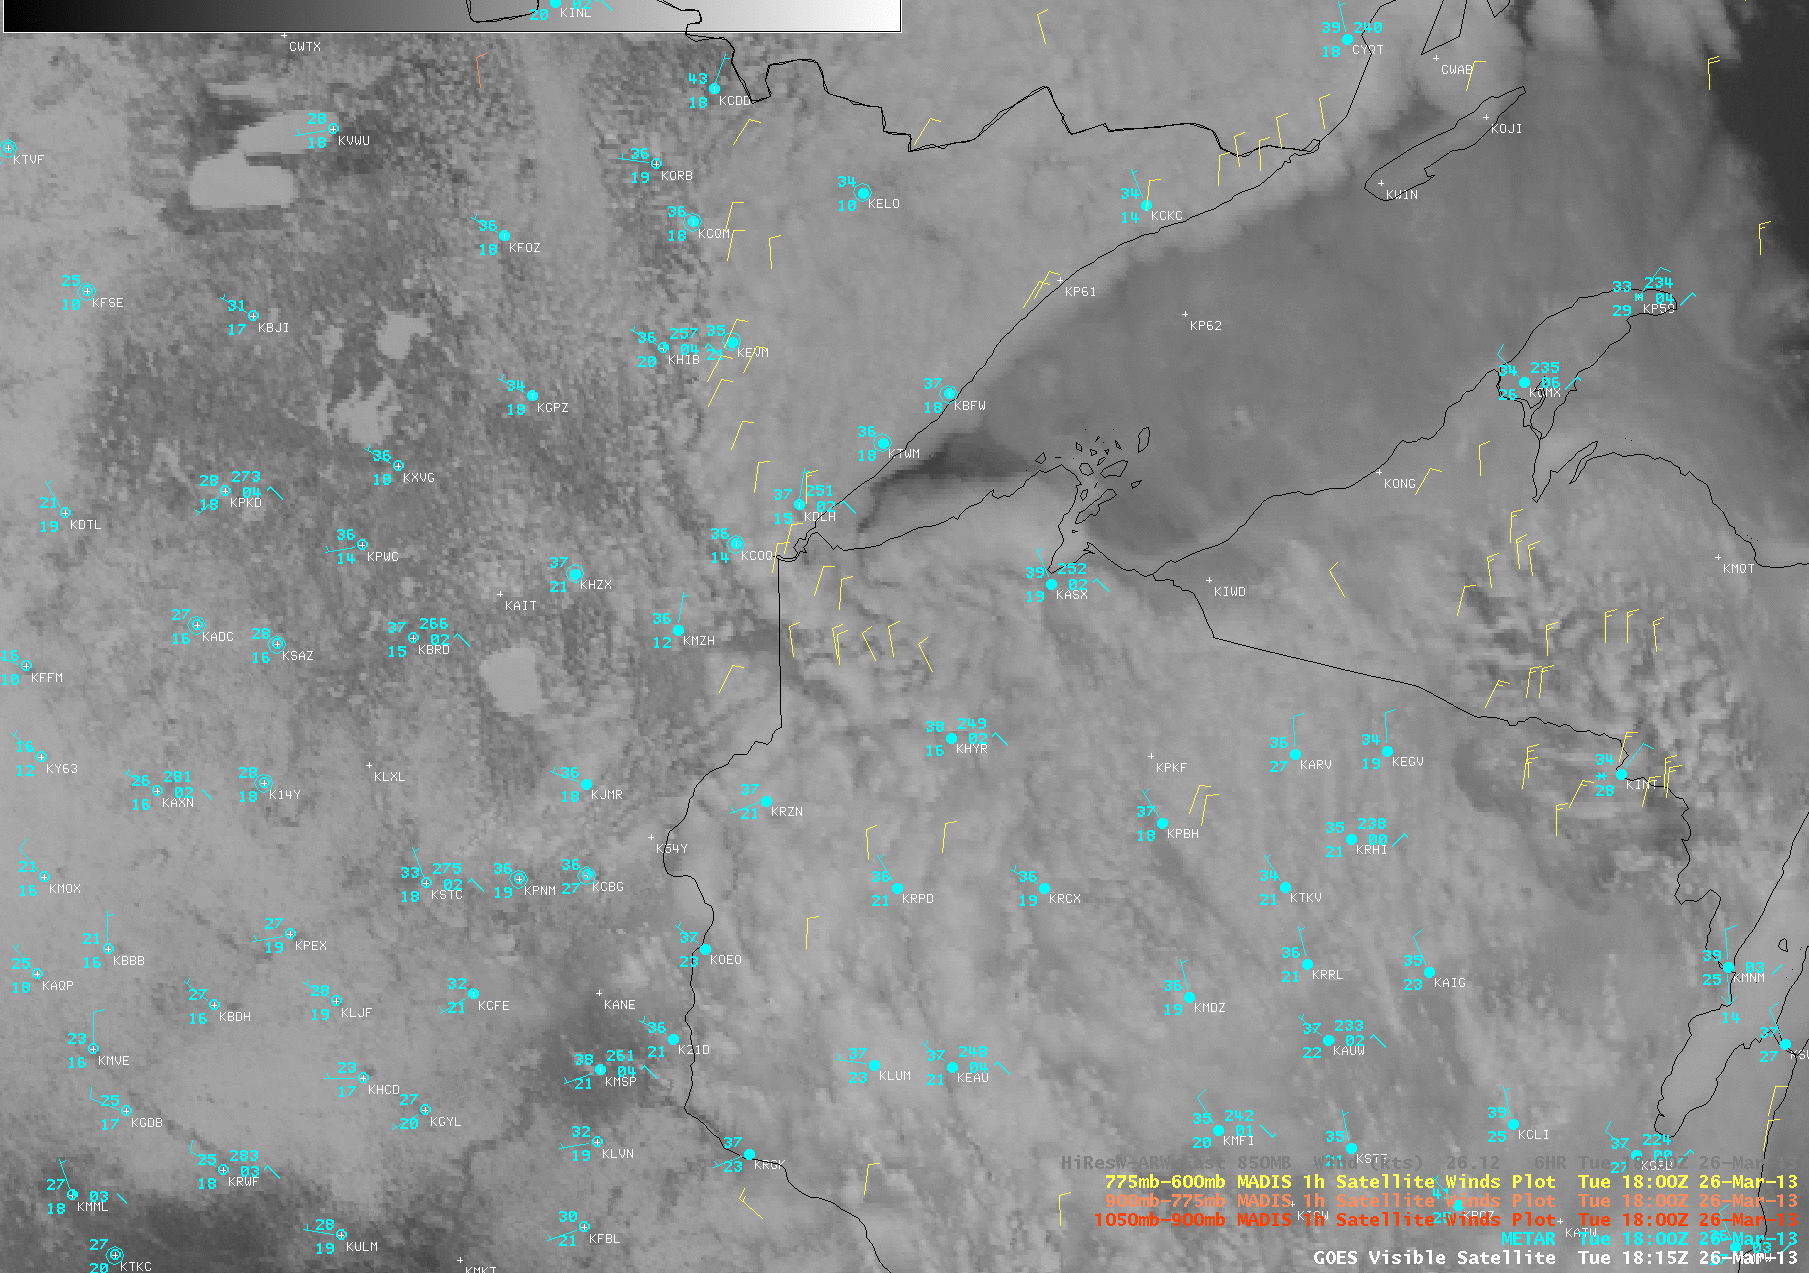 GOES-13 0.63 Âµm visible channel images with MADIS 1-hour interval atmospheric motion vectors